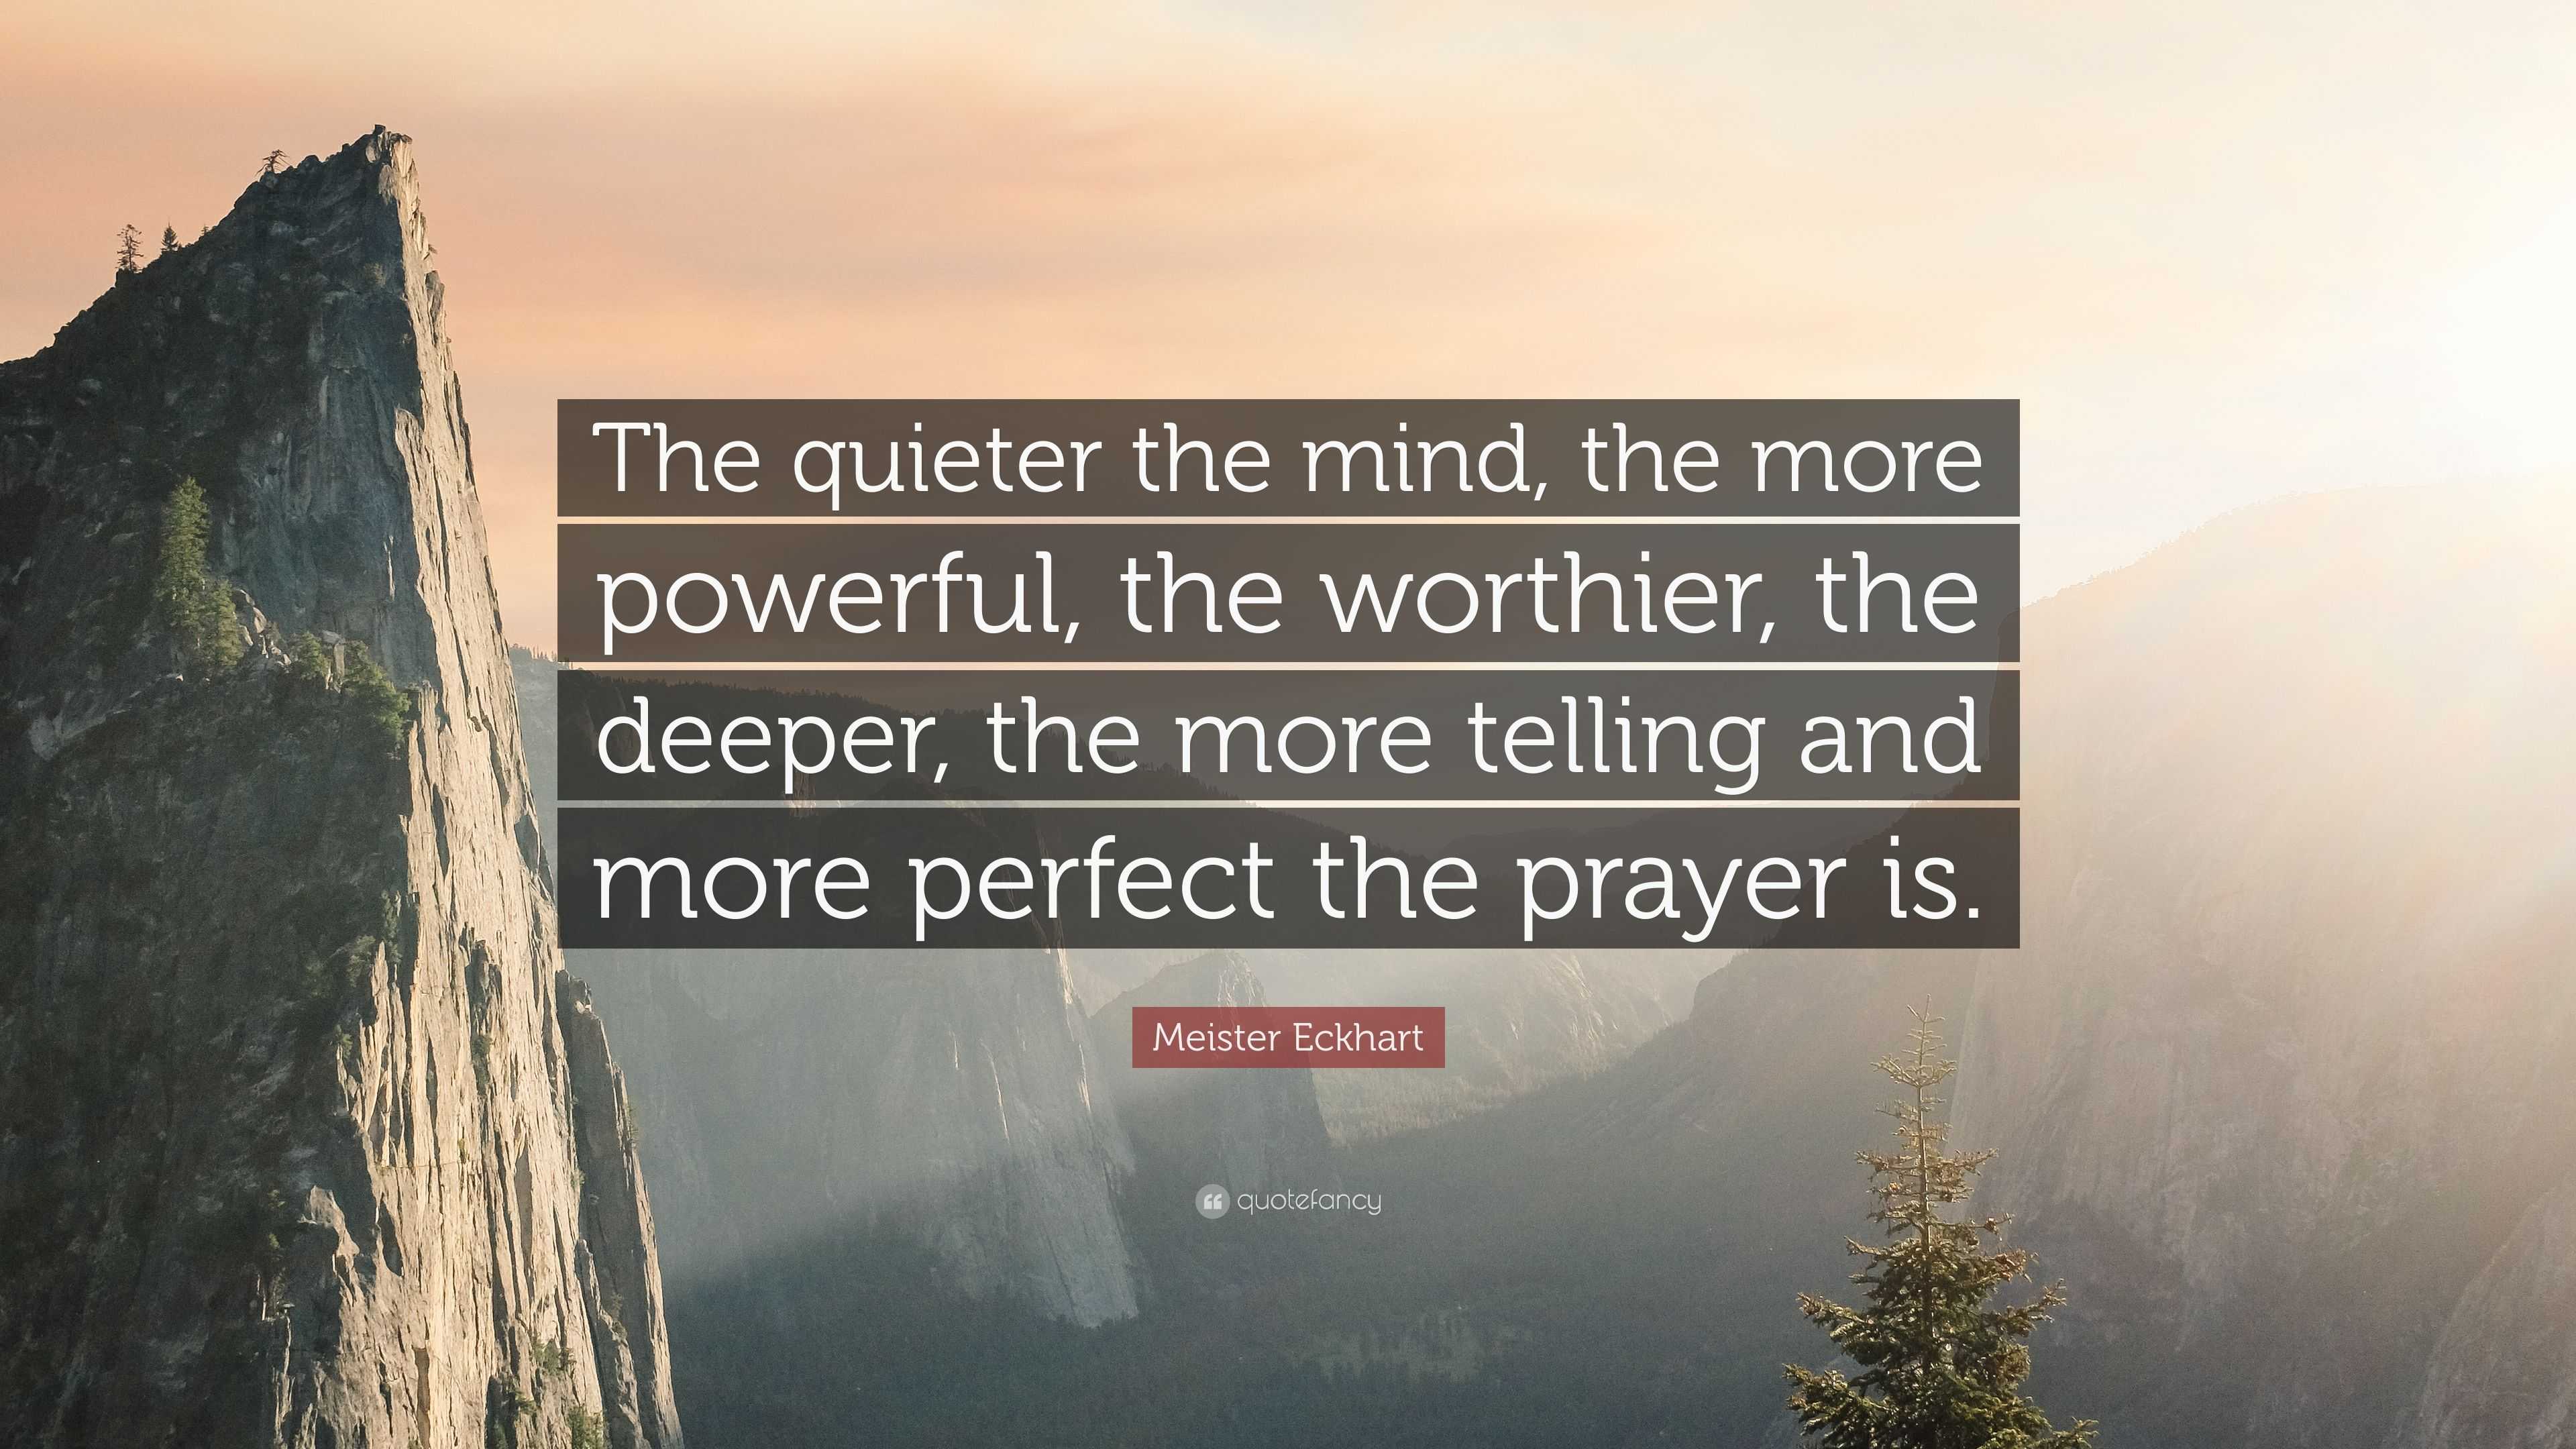 Meister Eckhart Quote: “The quieter the mind, the more powerful, the ...